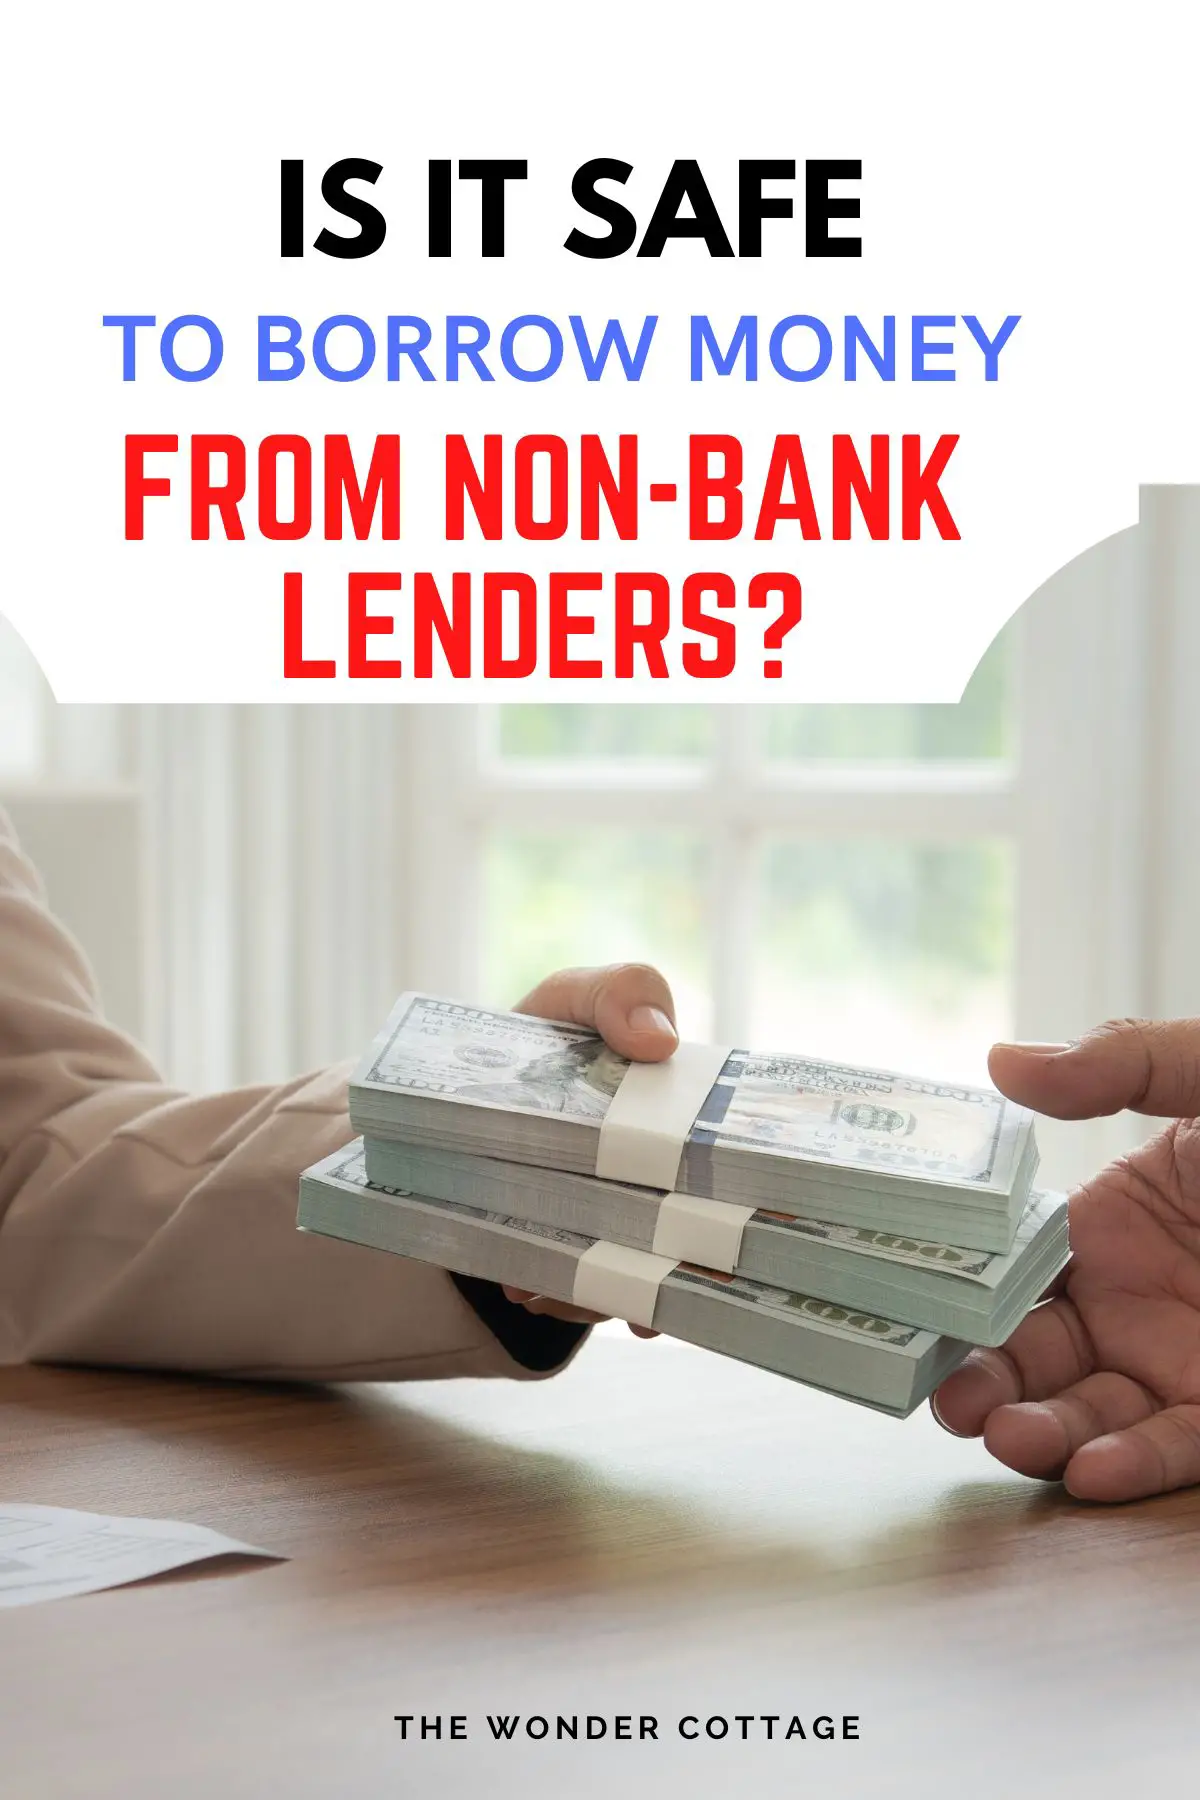 Is It Safe To Borrow Money From Non-Bank Lenders?